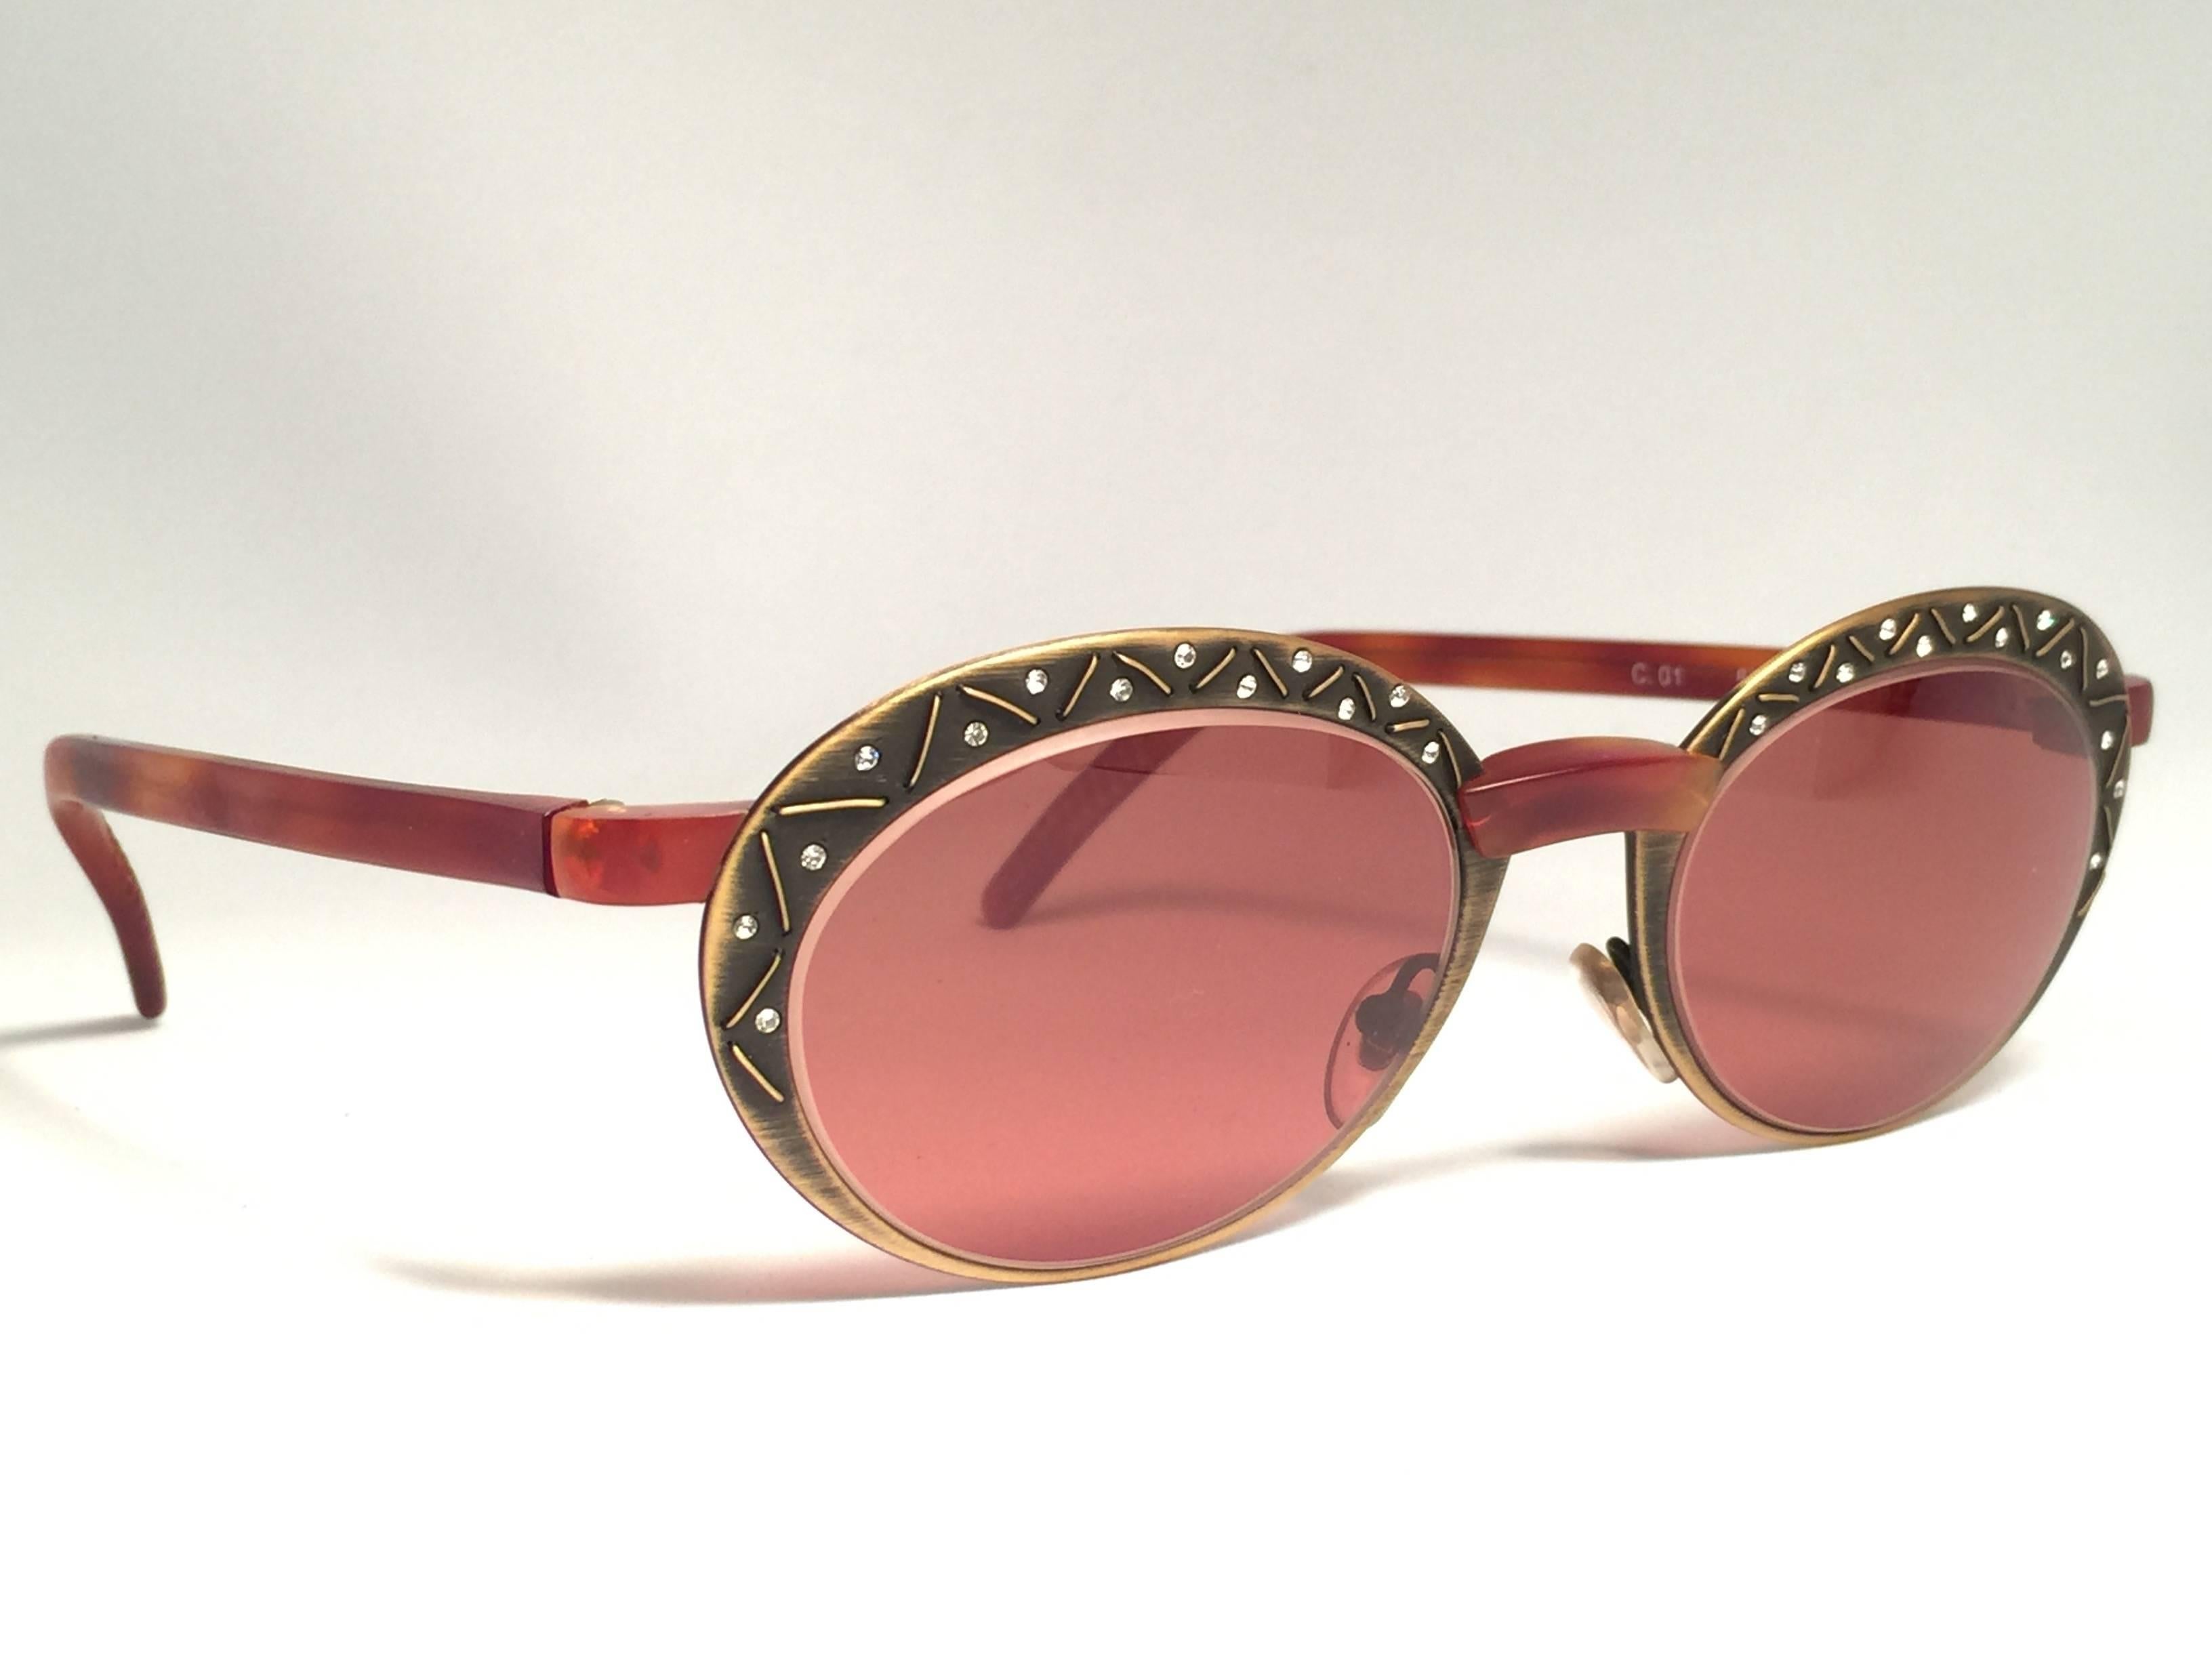 New Vintage Casanova oval copper with rhinestones detailed C01  lenses.

New, never worn or displayed.

Made in Italy.